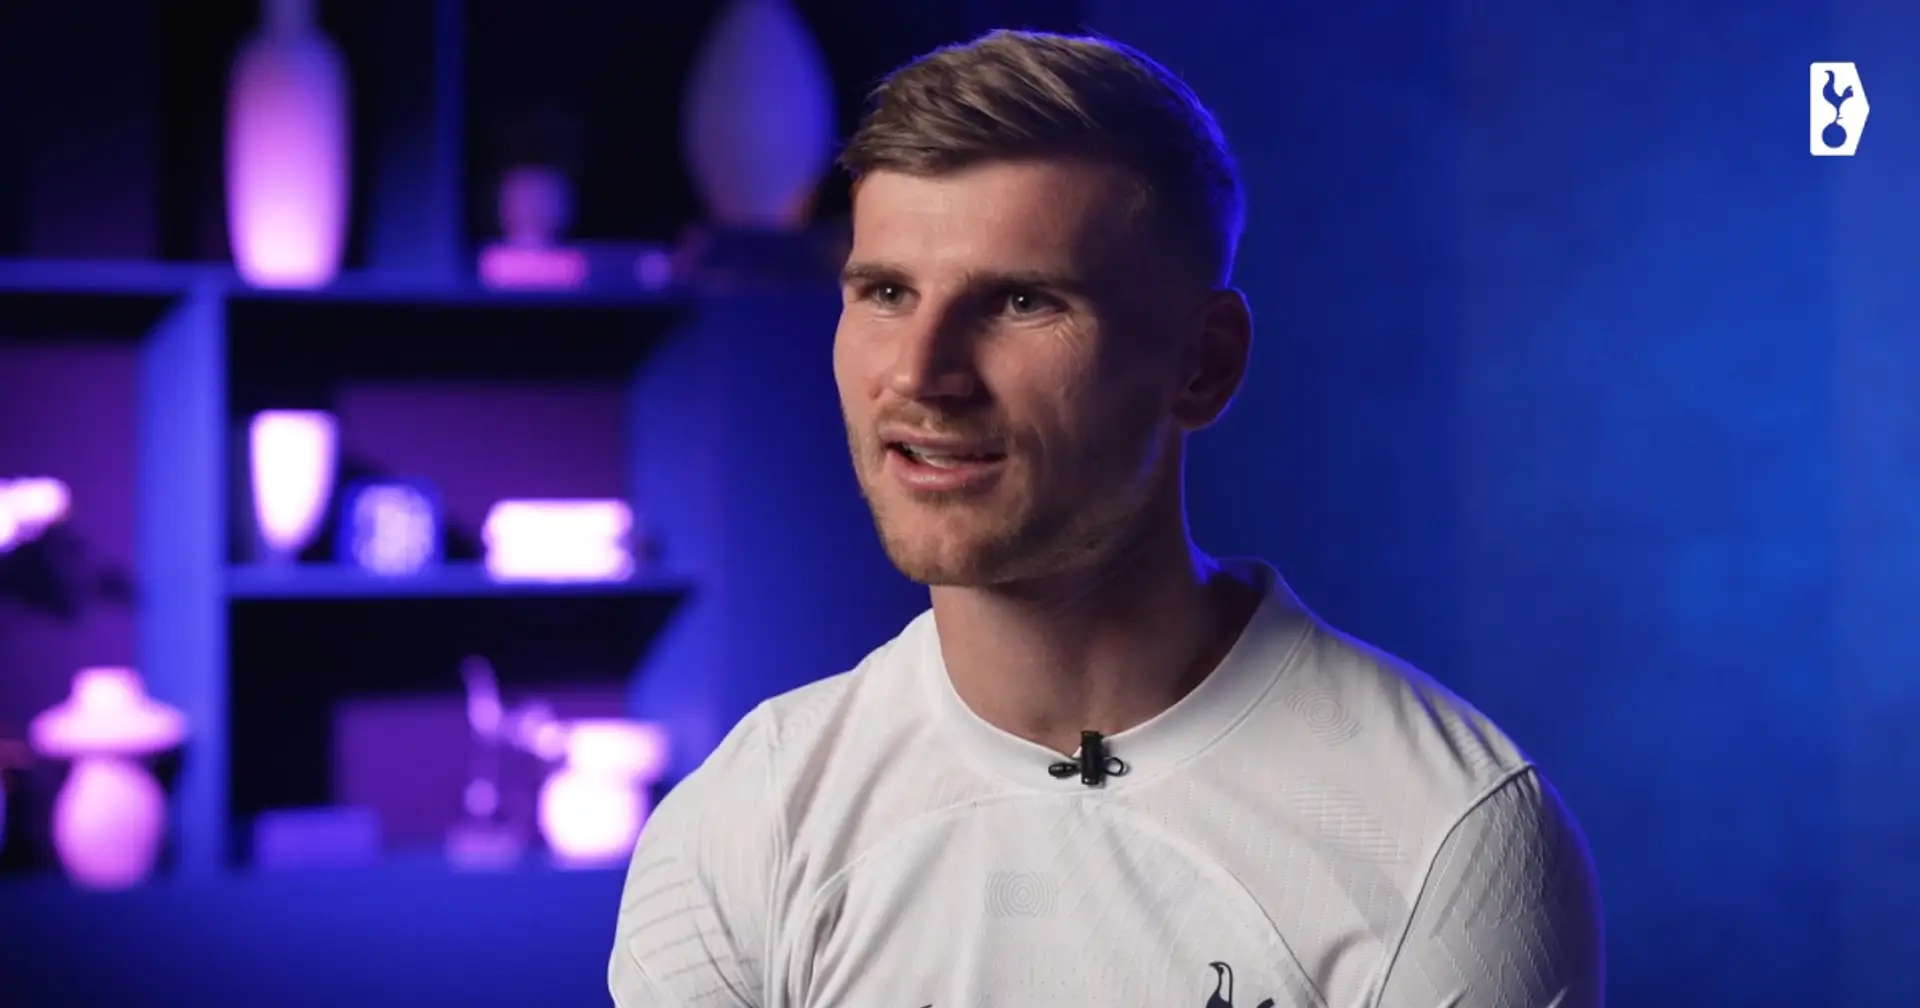 Timo Werner refuses to name Chelsea in his first Spurs interview, refers to Blues as his 'old club'